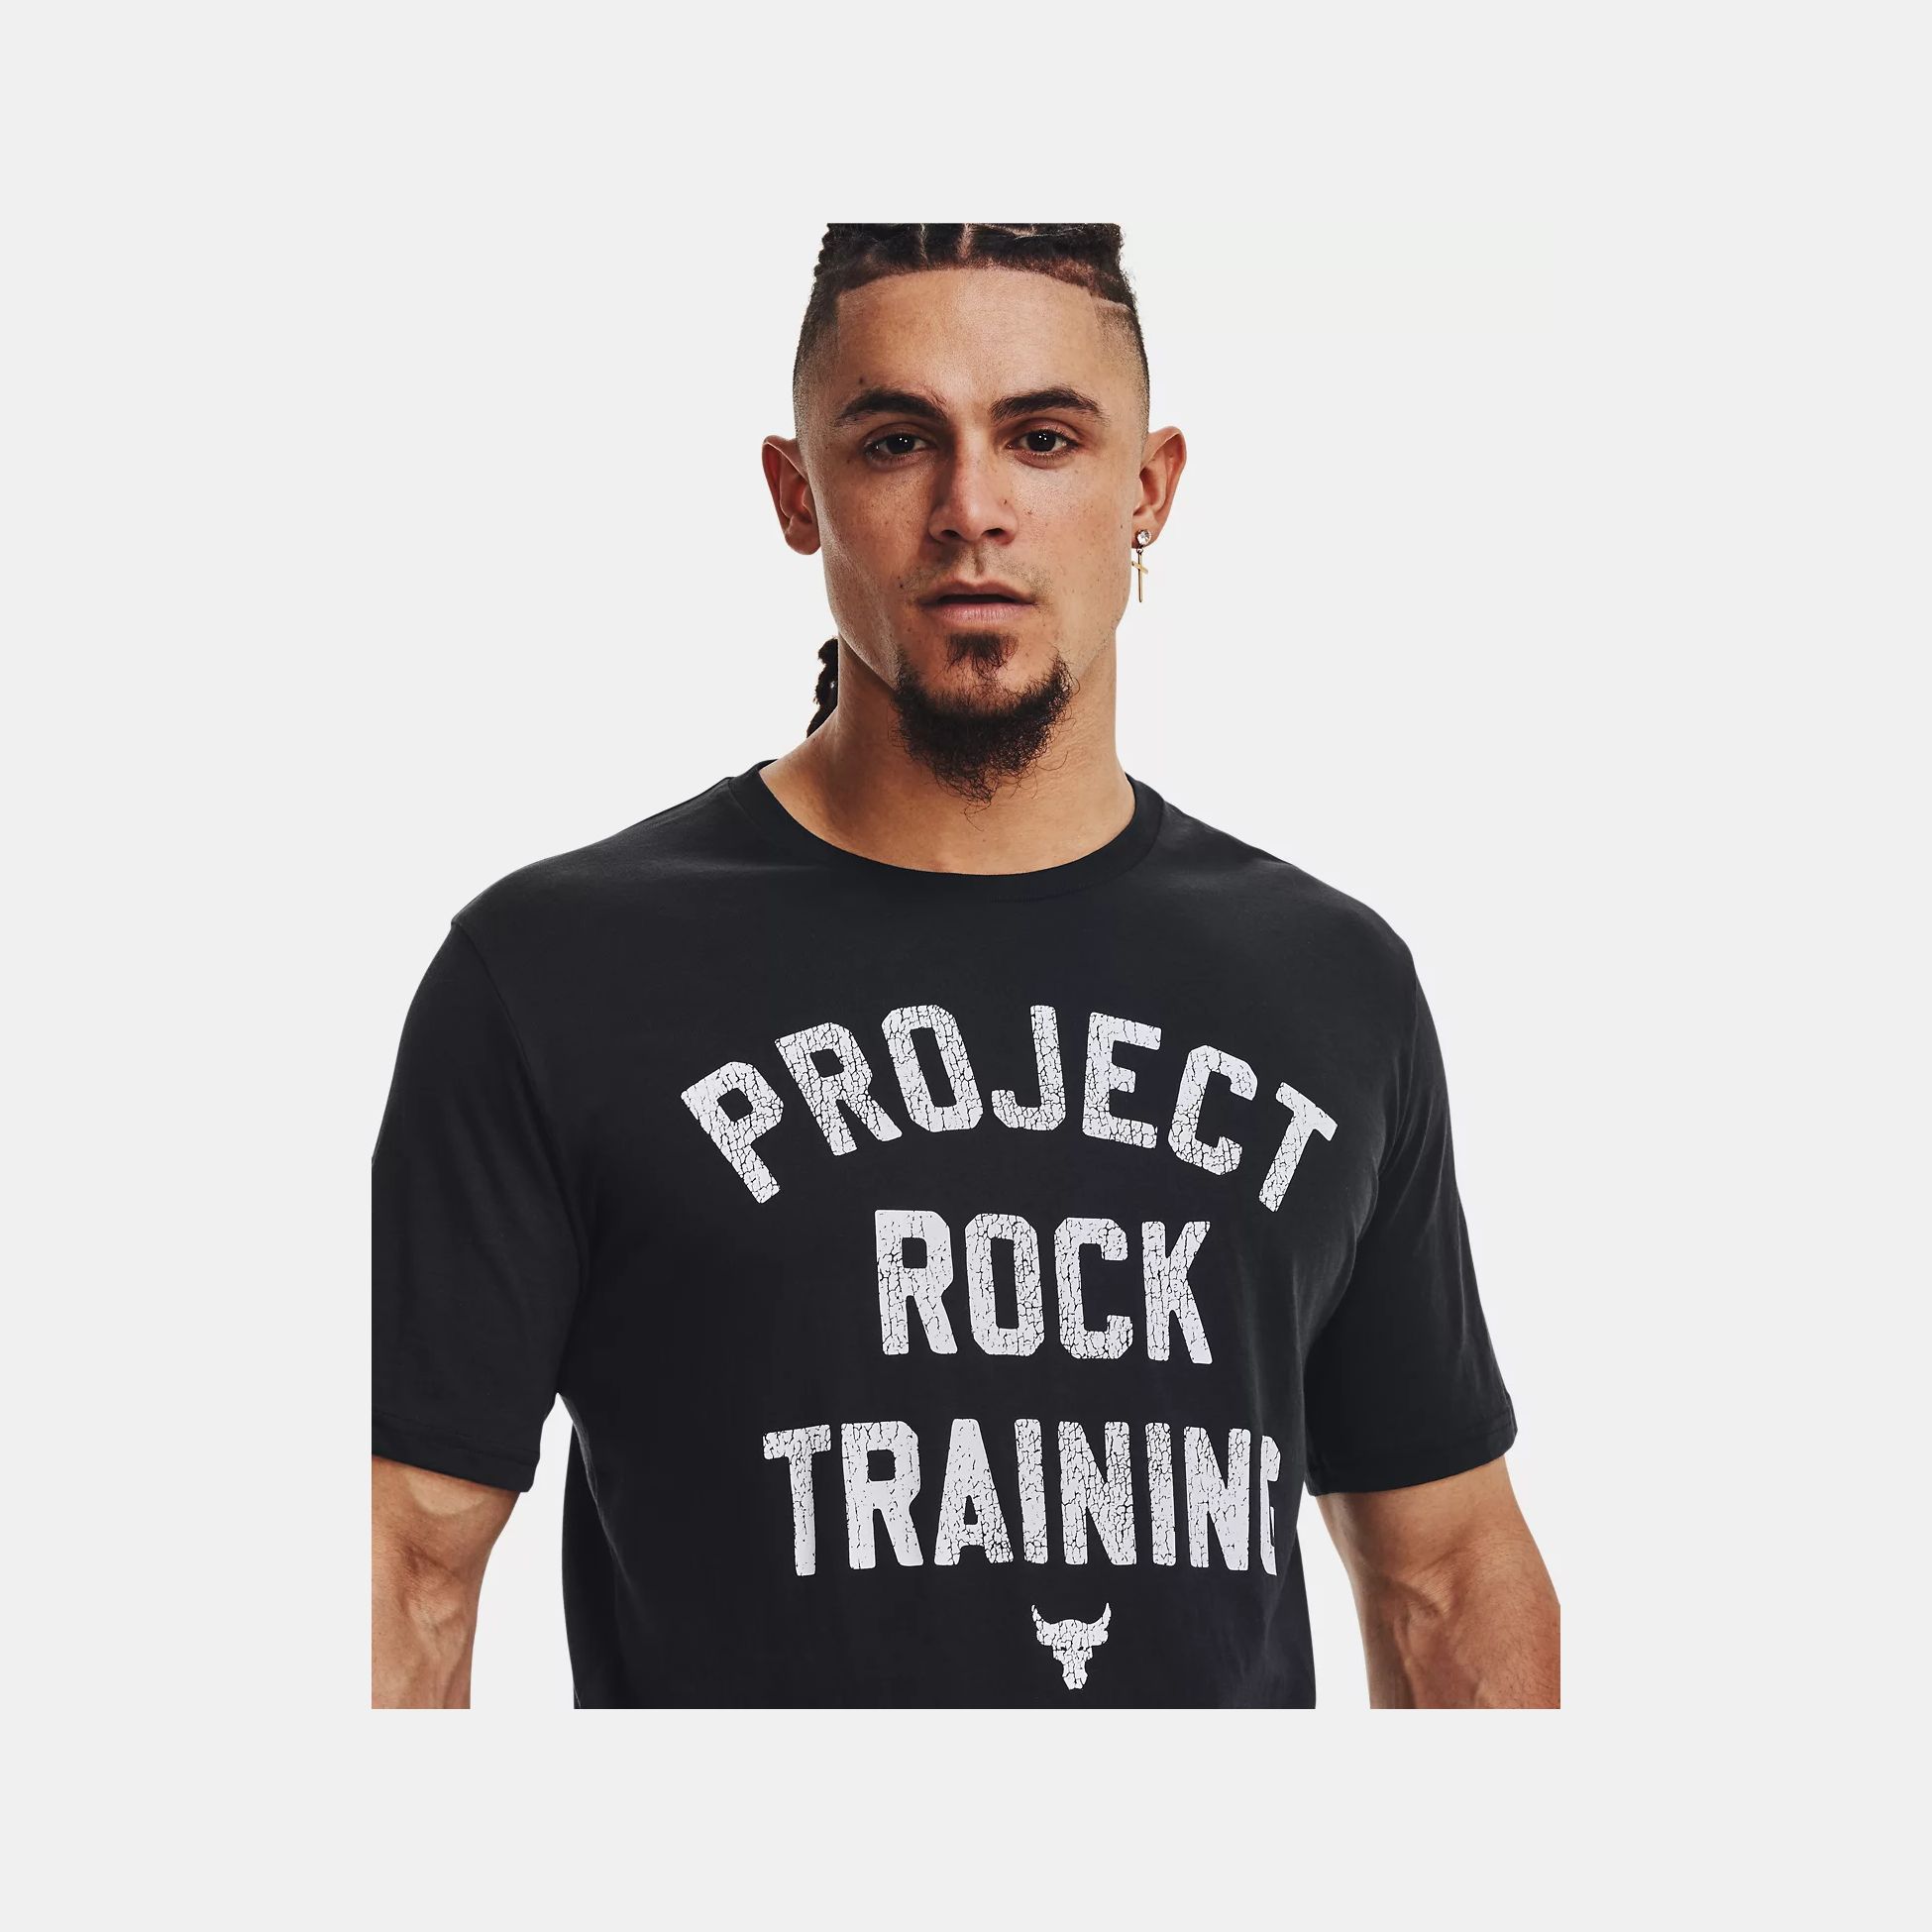 T-Shirts & Polo -  under armour Project Rock Training Short Sleeve